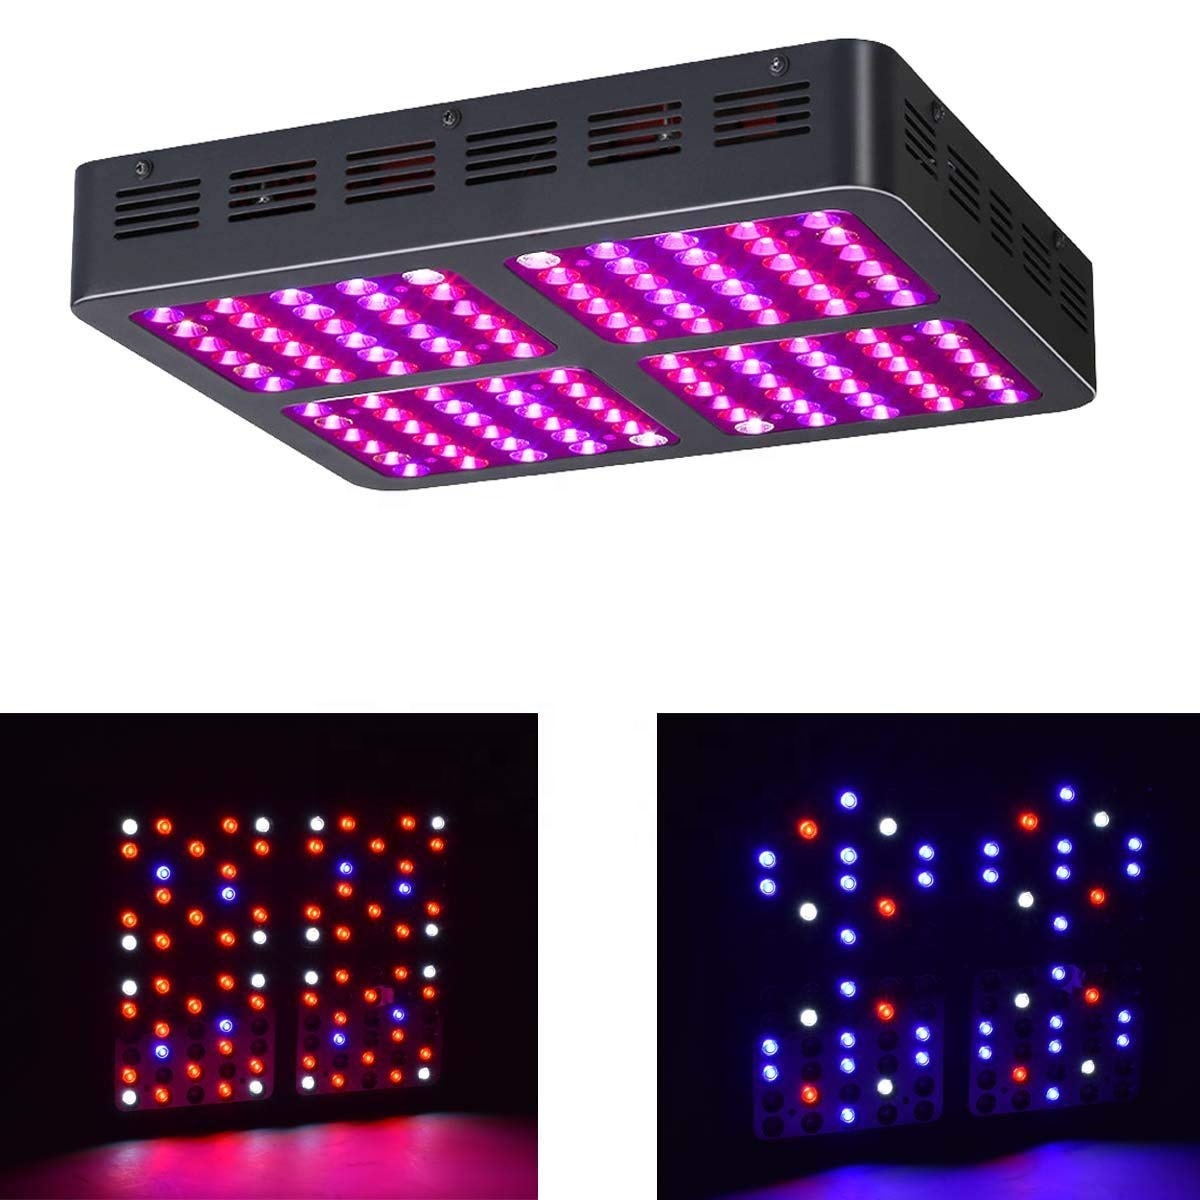 Full spectrum LED Grow Light 1200W Double Control LED Grow Lights Indoor Plants Lamp for Blossoms and Growing